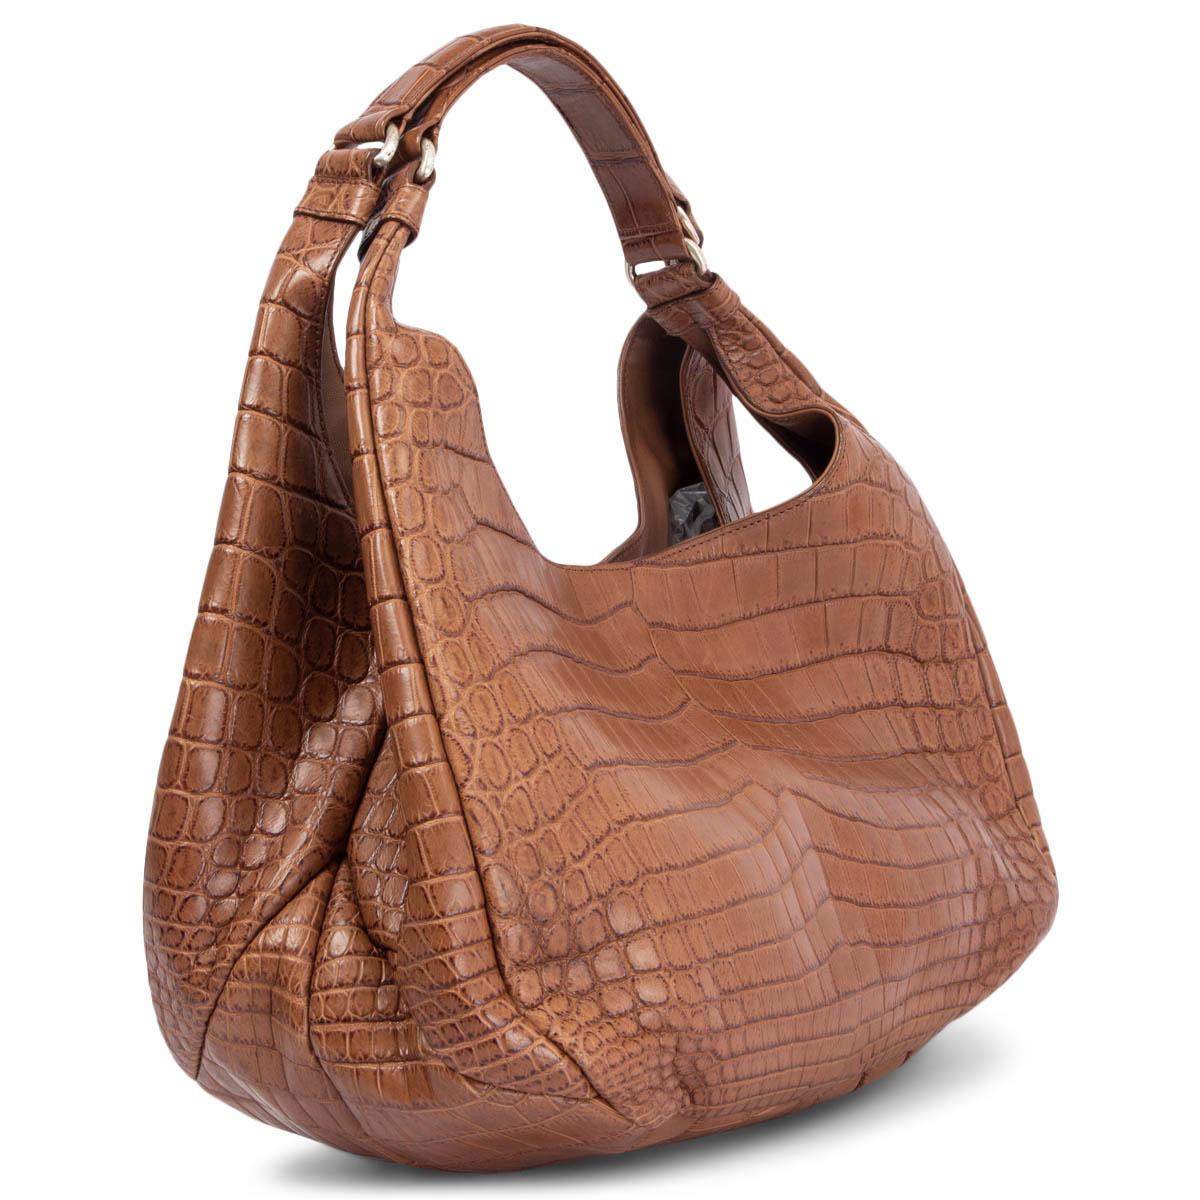 100% authentic Bottega Veneta shoulder bag in light brown matte crocodile. Closes with a magnet on top. Lined in off-white suede with a cell phone pocket against the front and a zipper pocket against the back. Has been carried and is in excellent